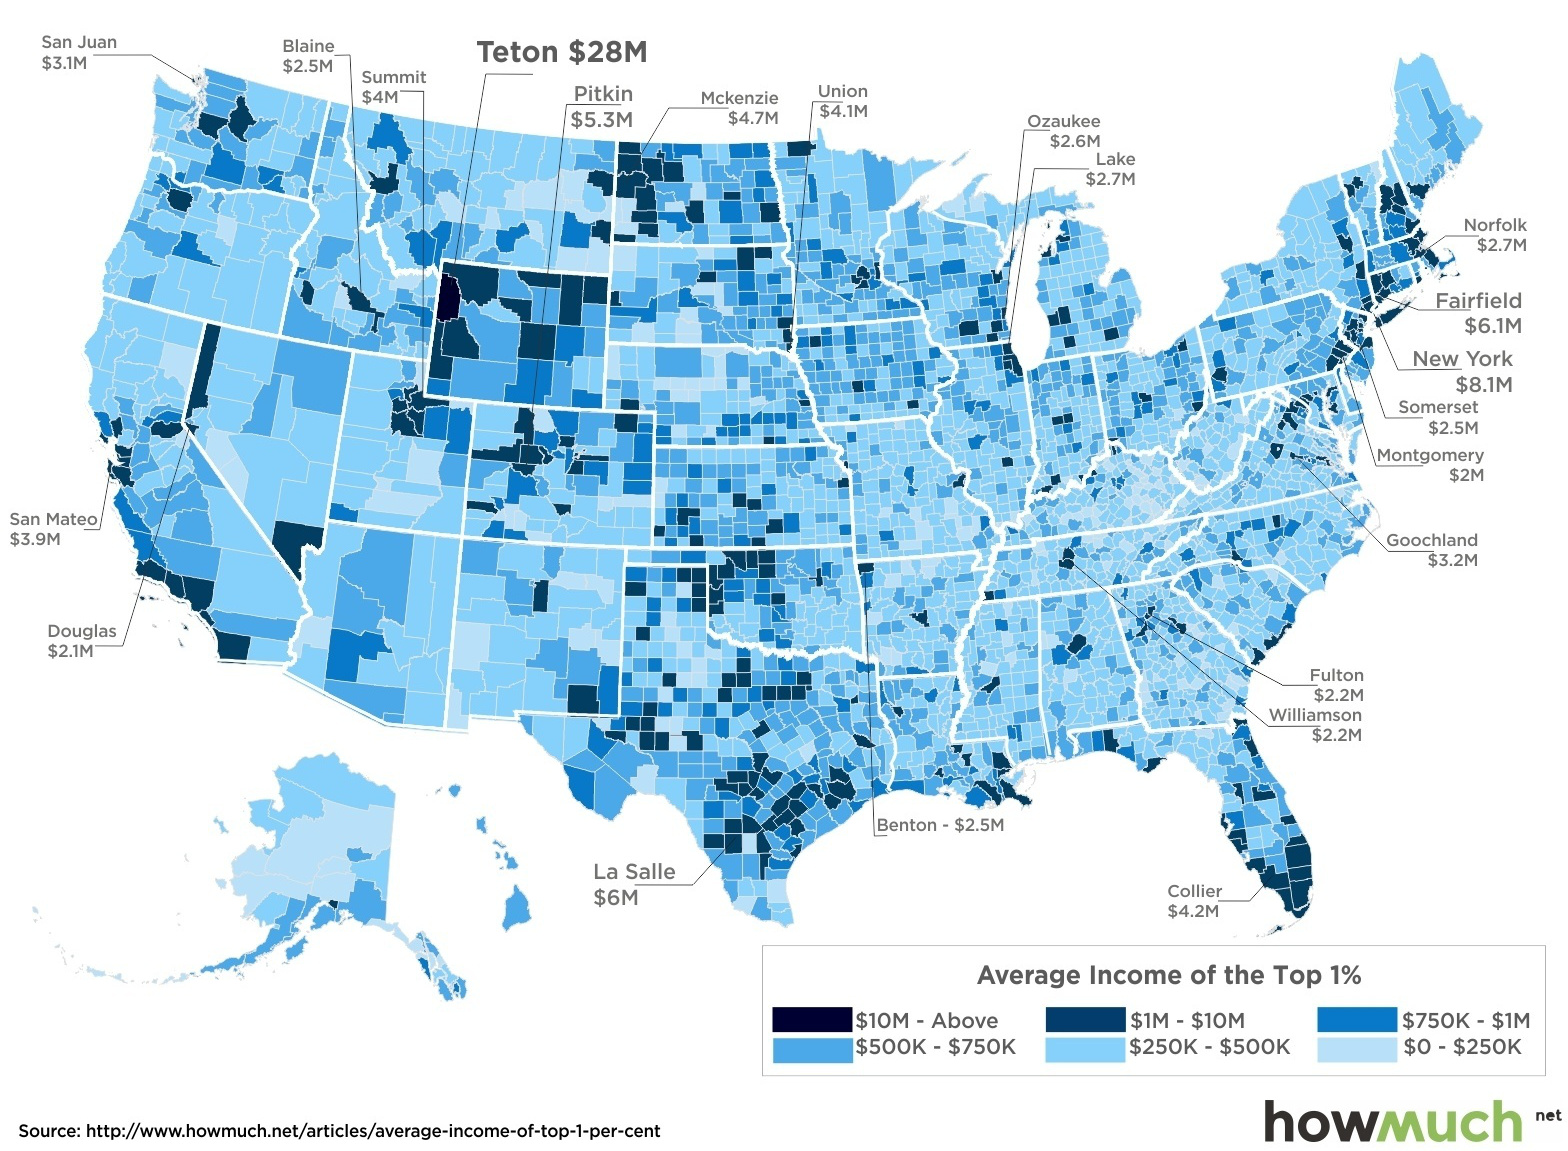 This Map Shows the Average Income of the Top 1% by Location